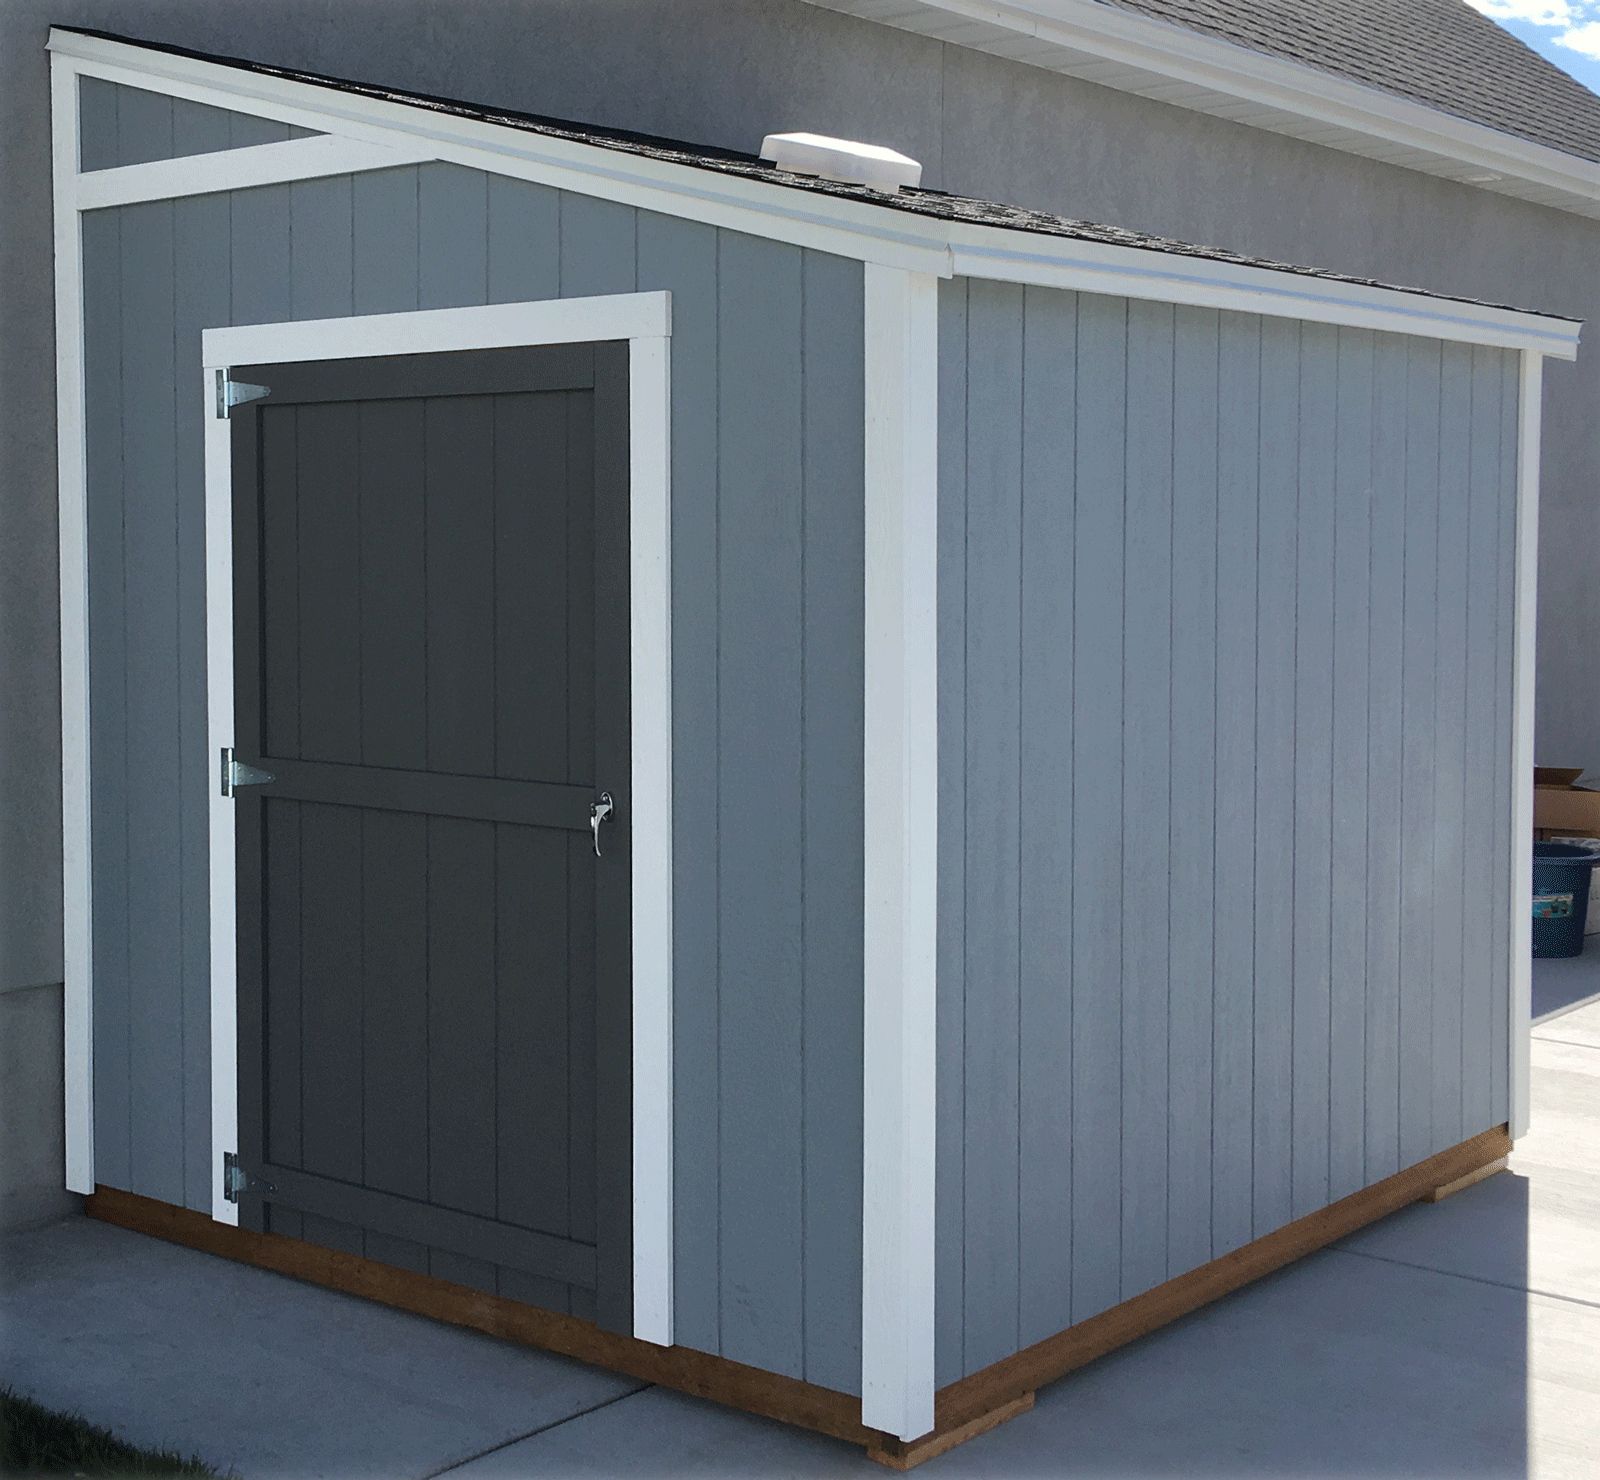 An 8 foot by 10 foot Lean-To Style Shed up against a house